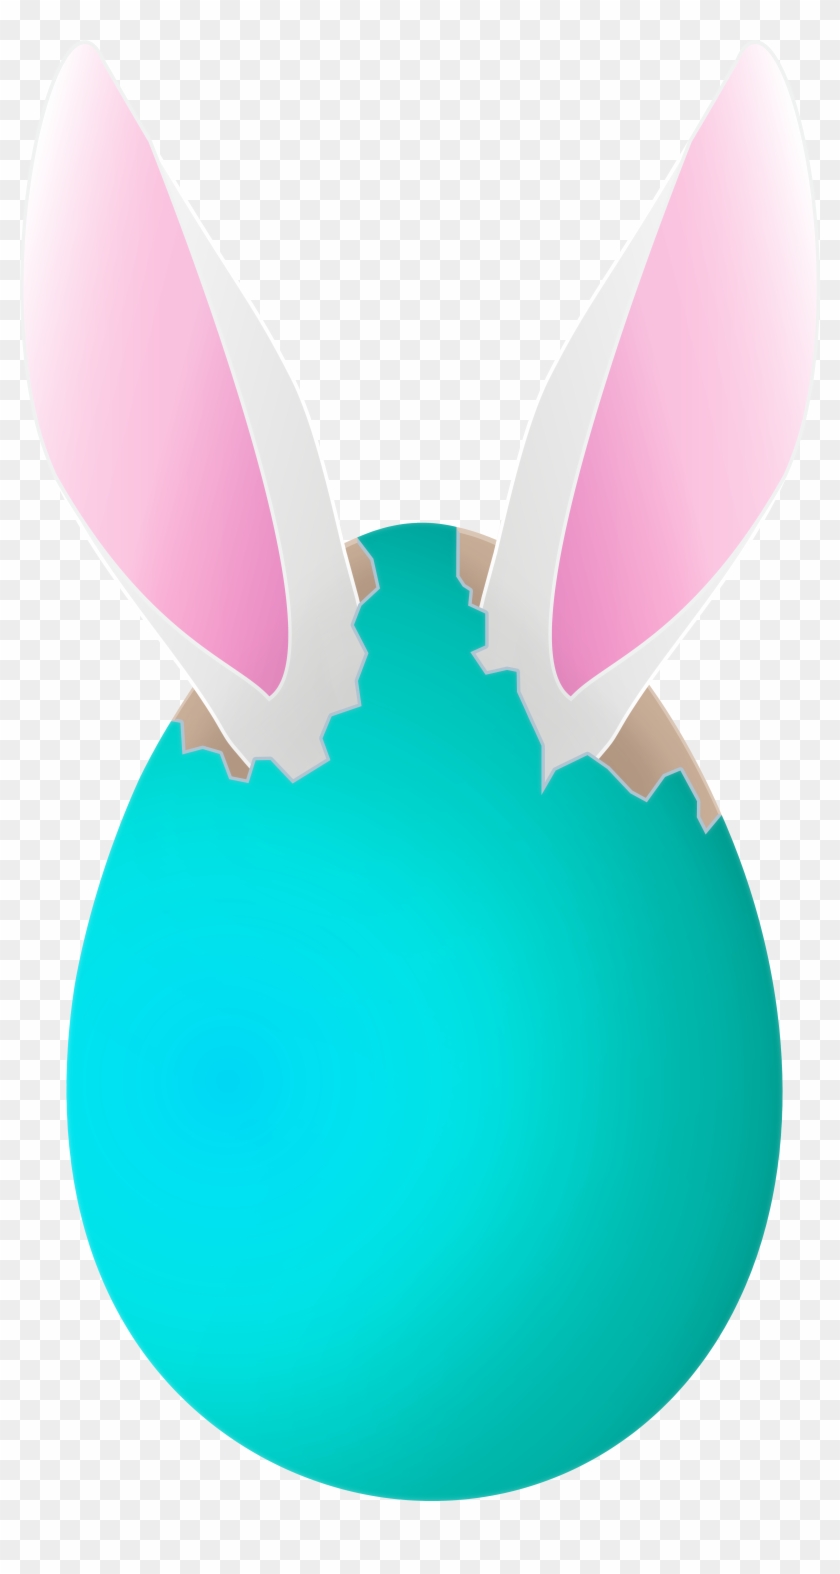 Blue Easter Egg With Bunny Ears Png Clipart Image - Illustration Transparent Png #2650892